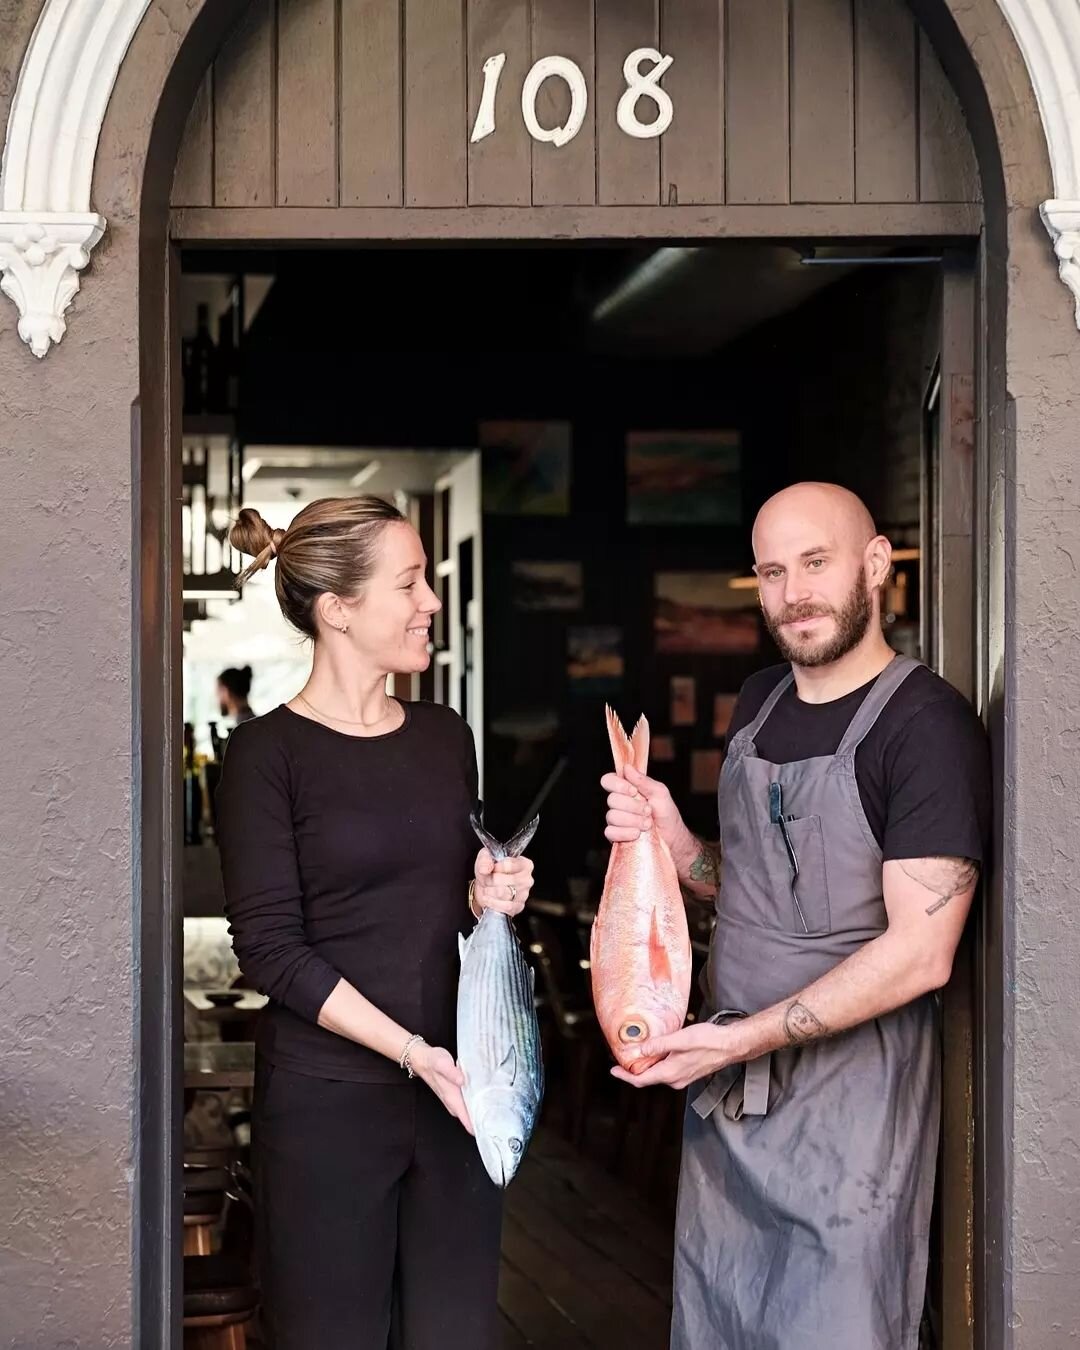 Our Market Fish is sustainably sourced from our supplier @getfishau each week so we can bring you the best catch on offer at Sydney Fish Markets!&nbsp;🐟&nbsp;We believe in their ethos of traceability, protection and enhancement of the marine environ